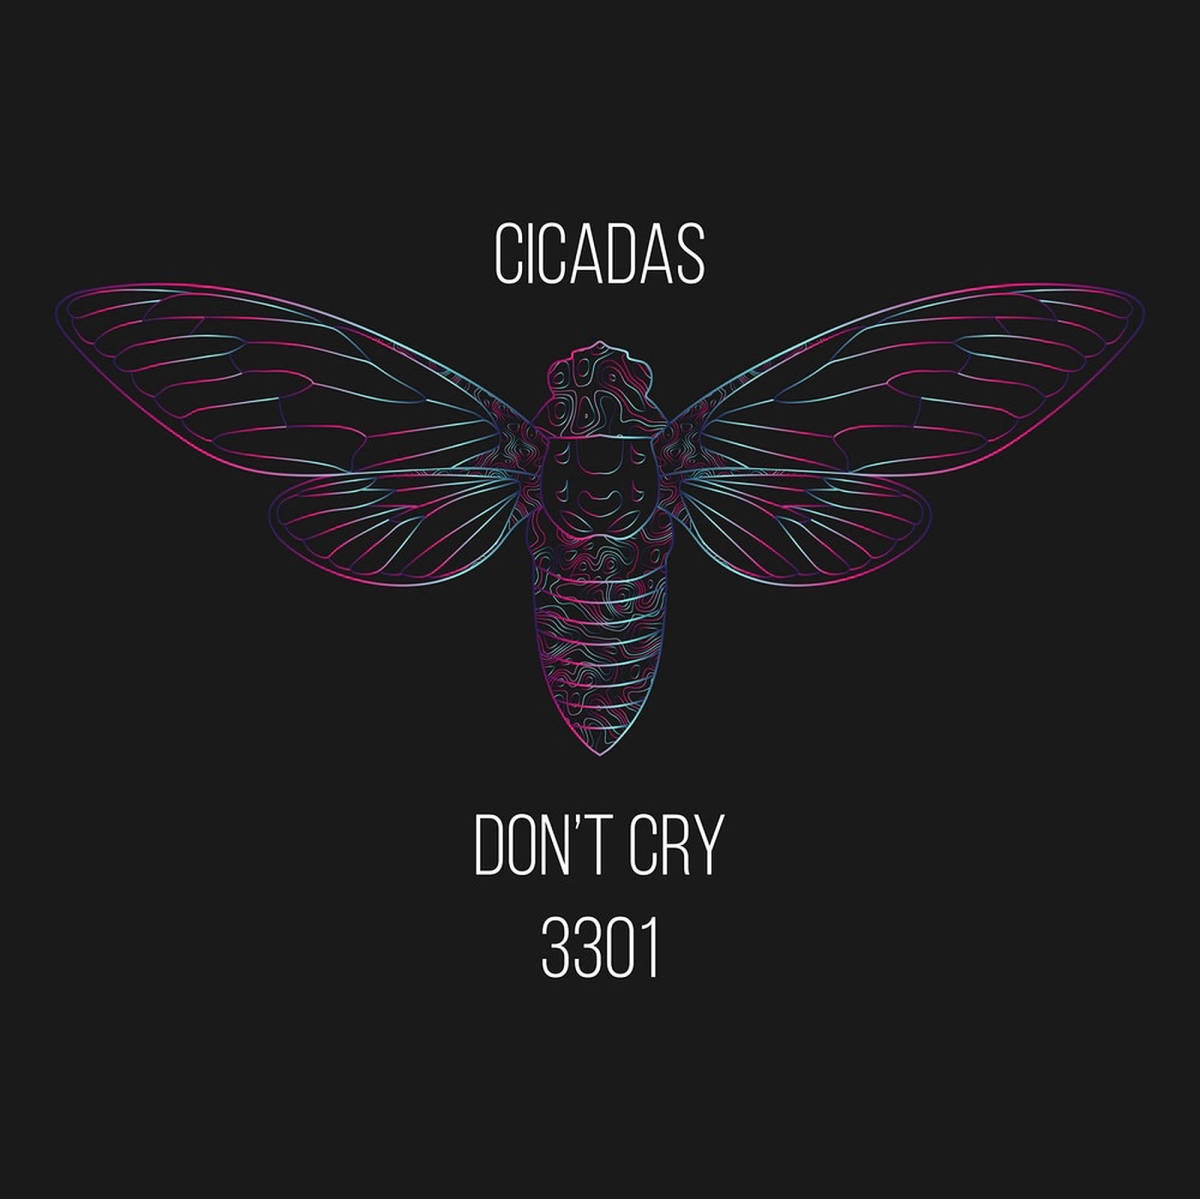 Cicada 3301: The Unsolved Cryptographic Puzzle - A Deep Dive into the Mystery